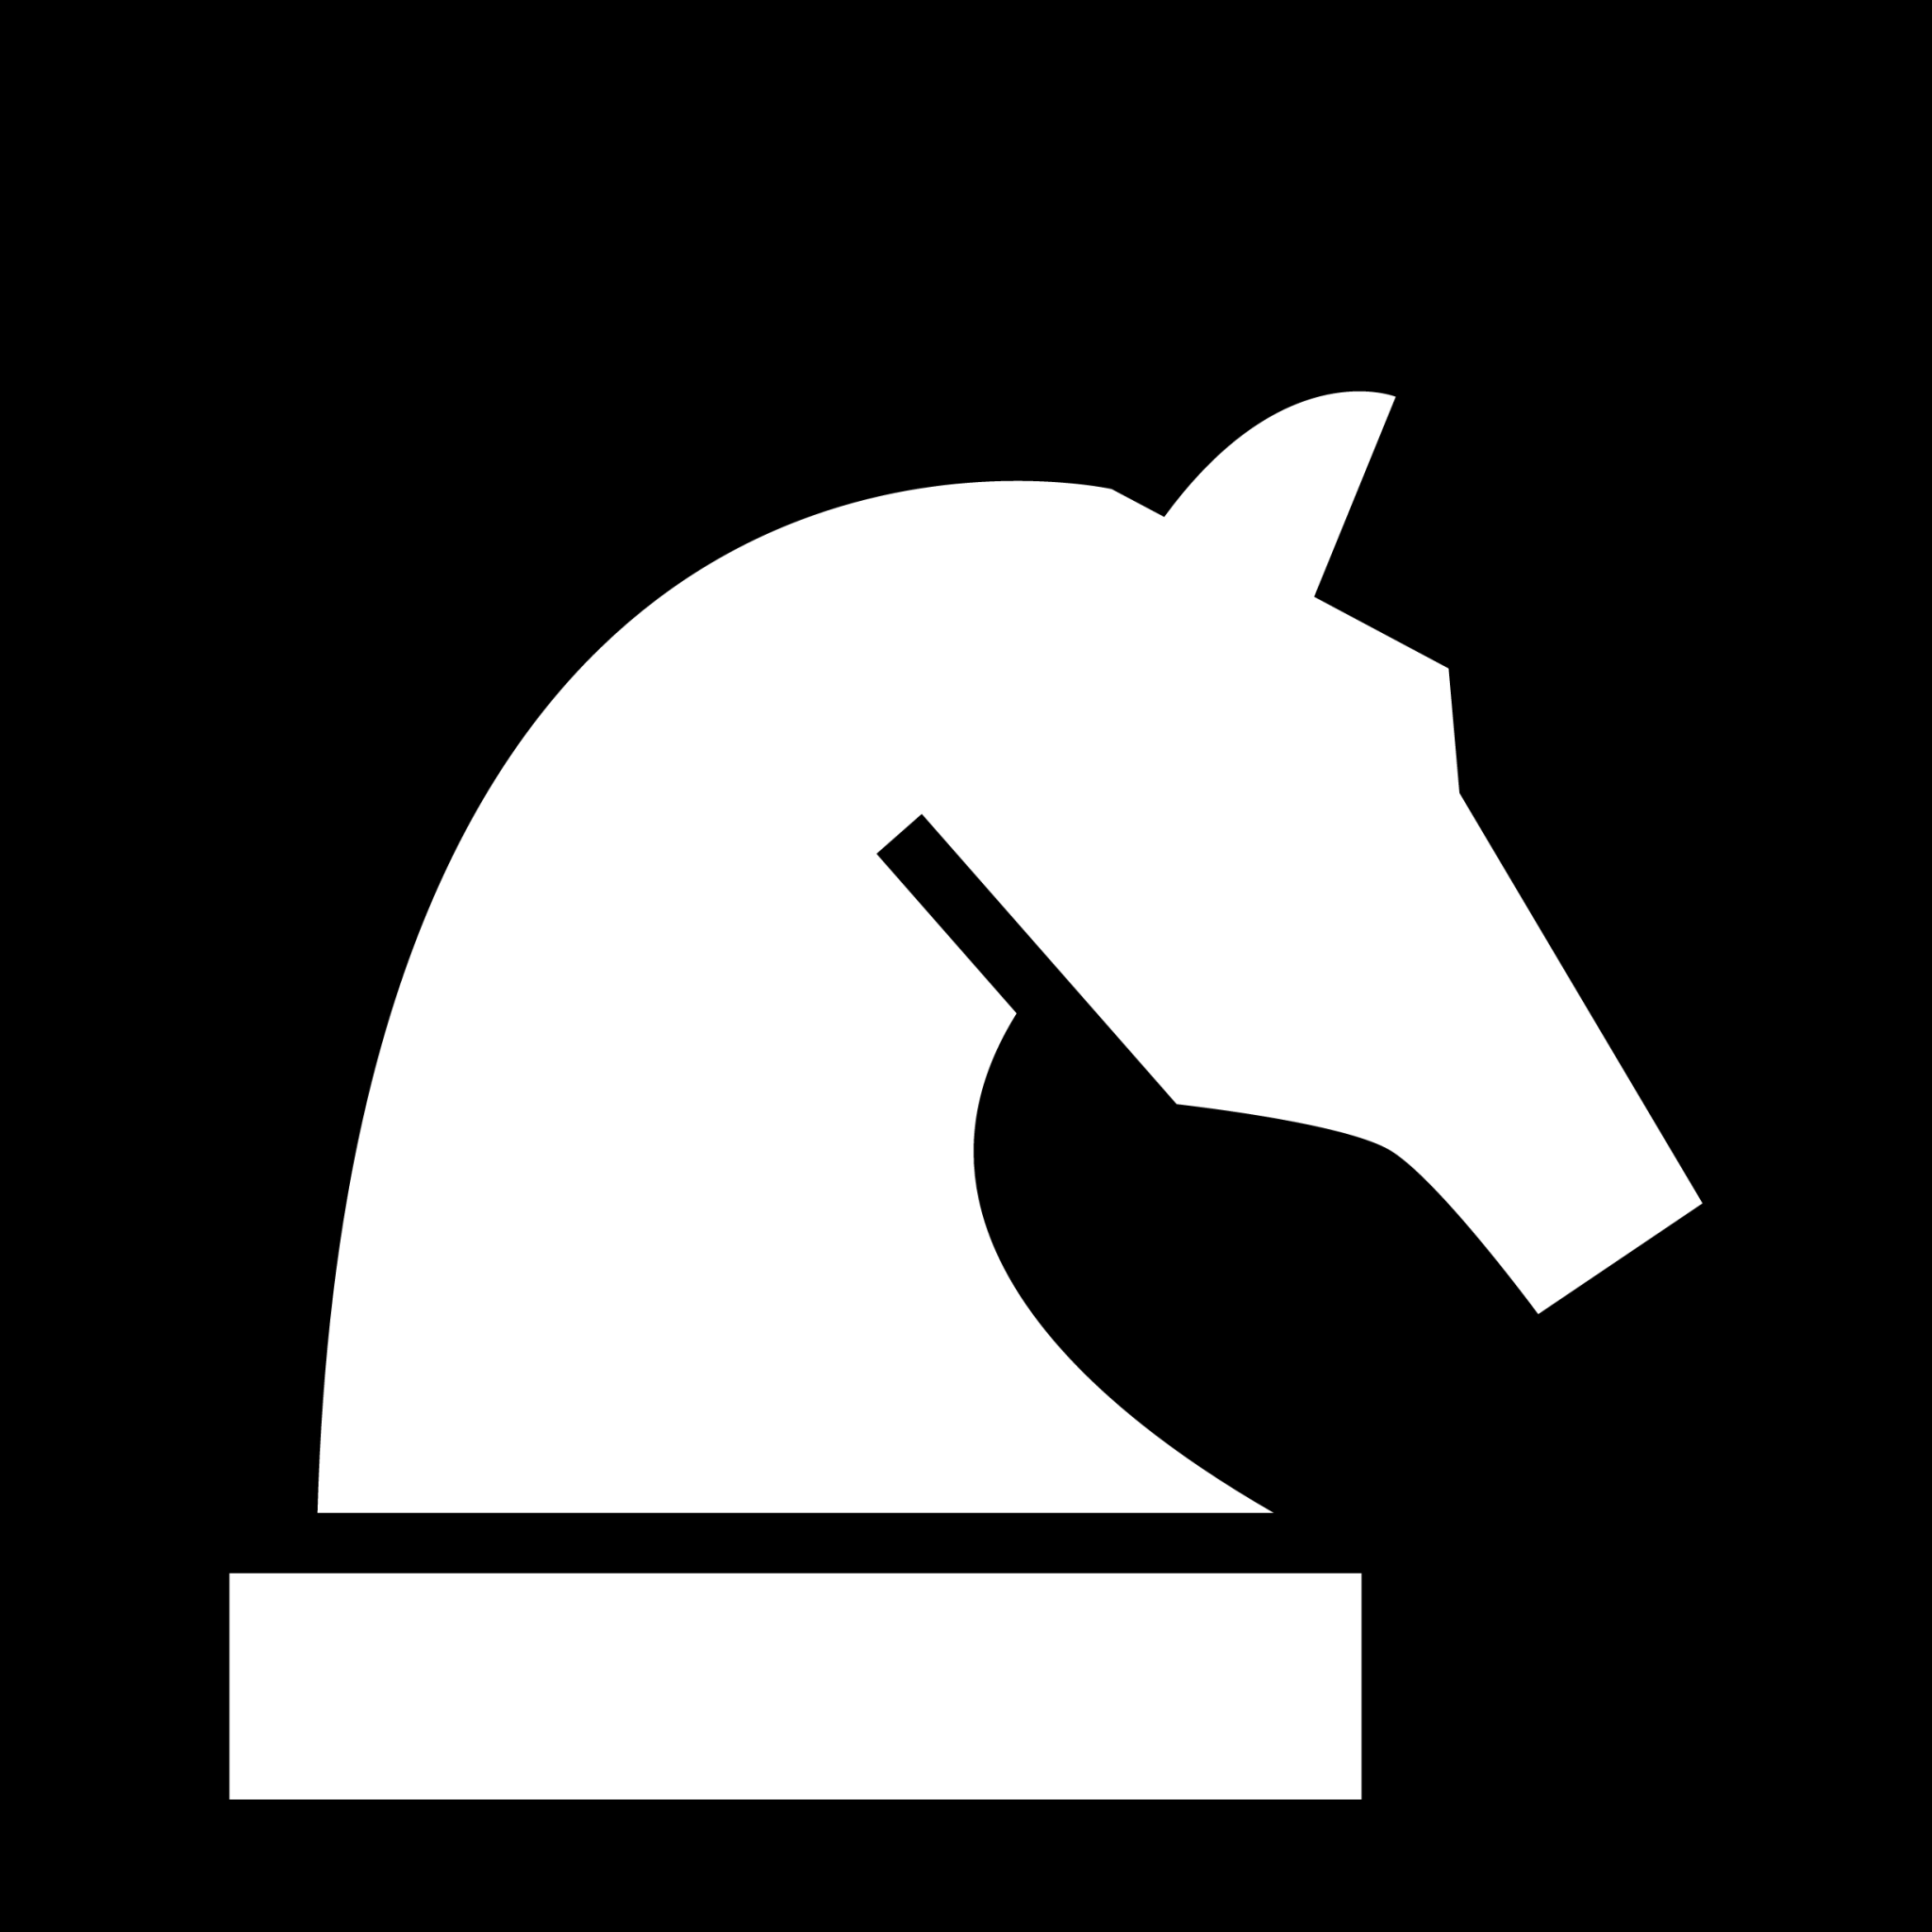 Chess, knight, online, app, game app icon - Download on Iconfinder